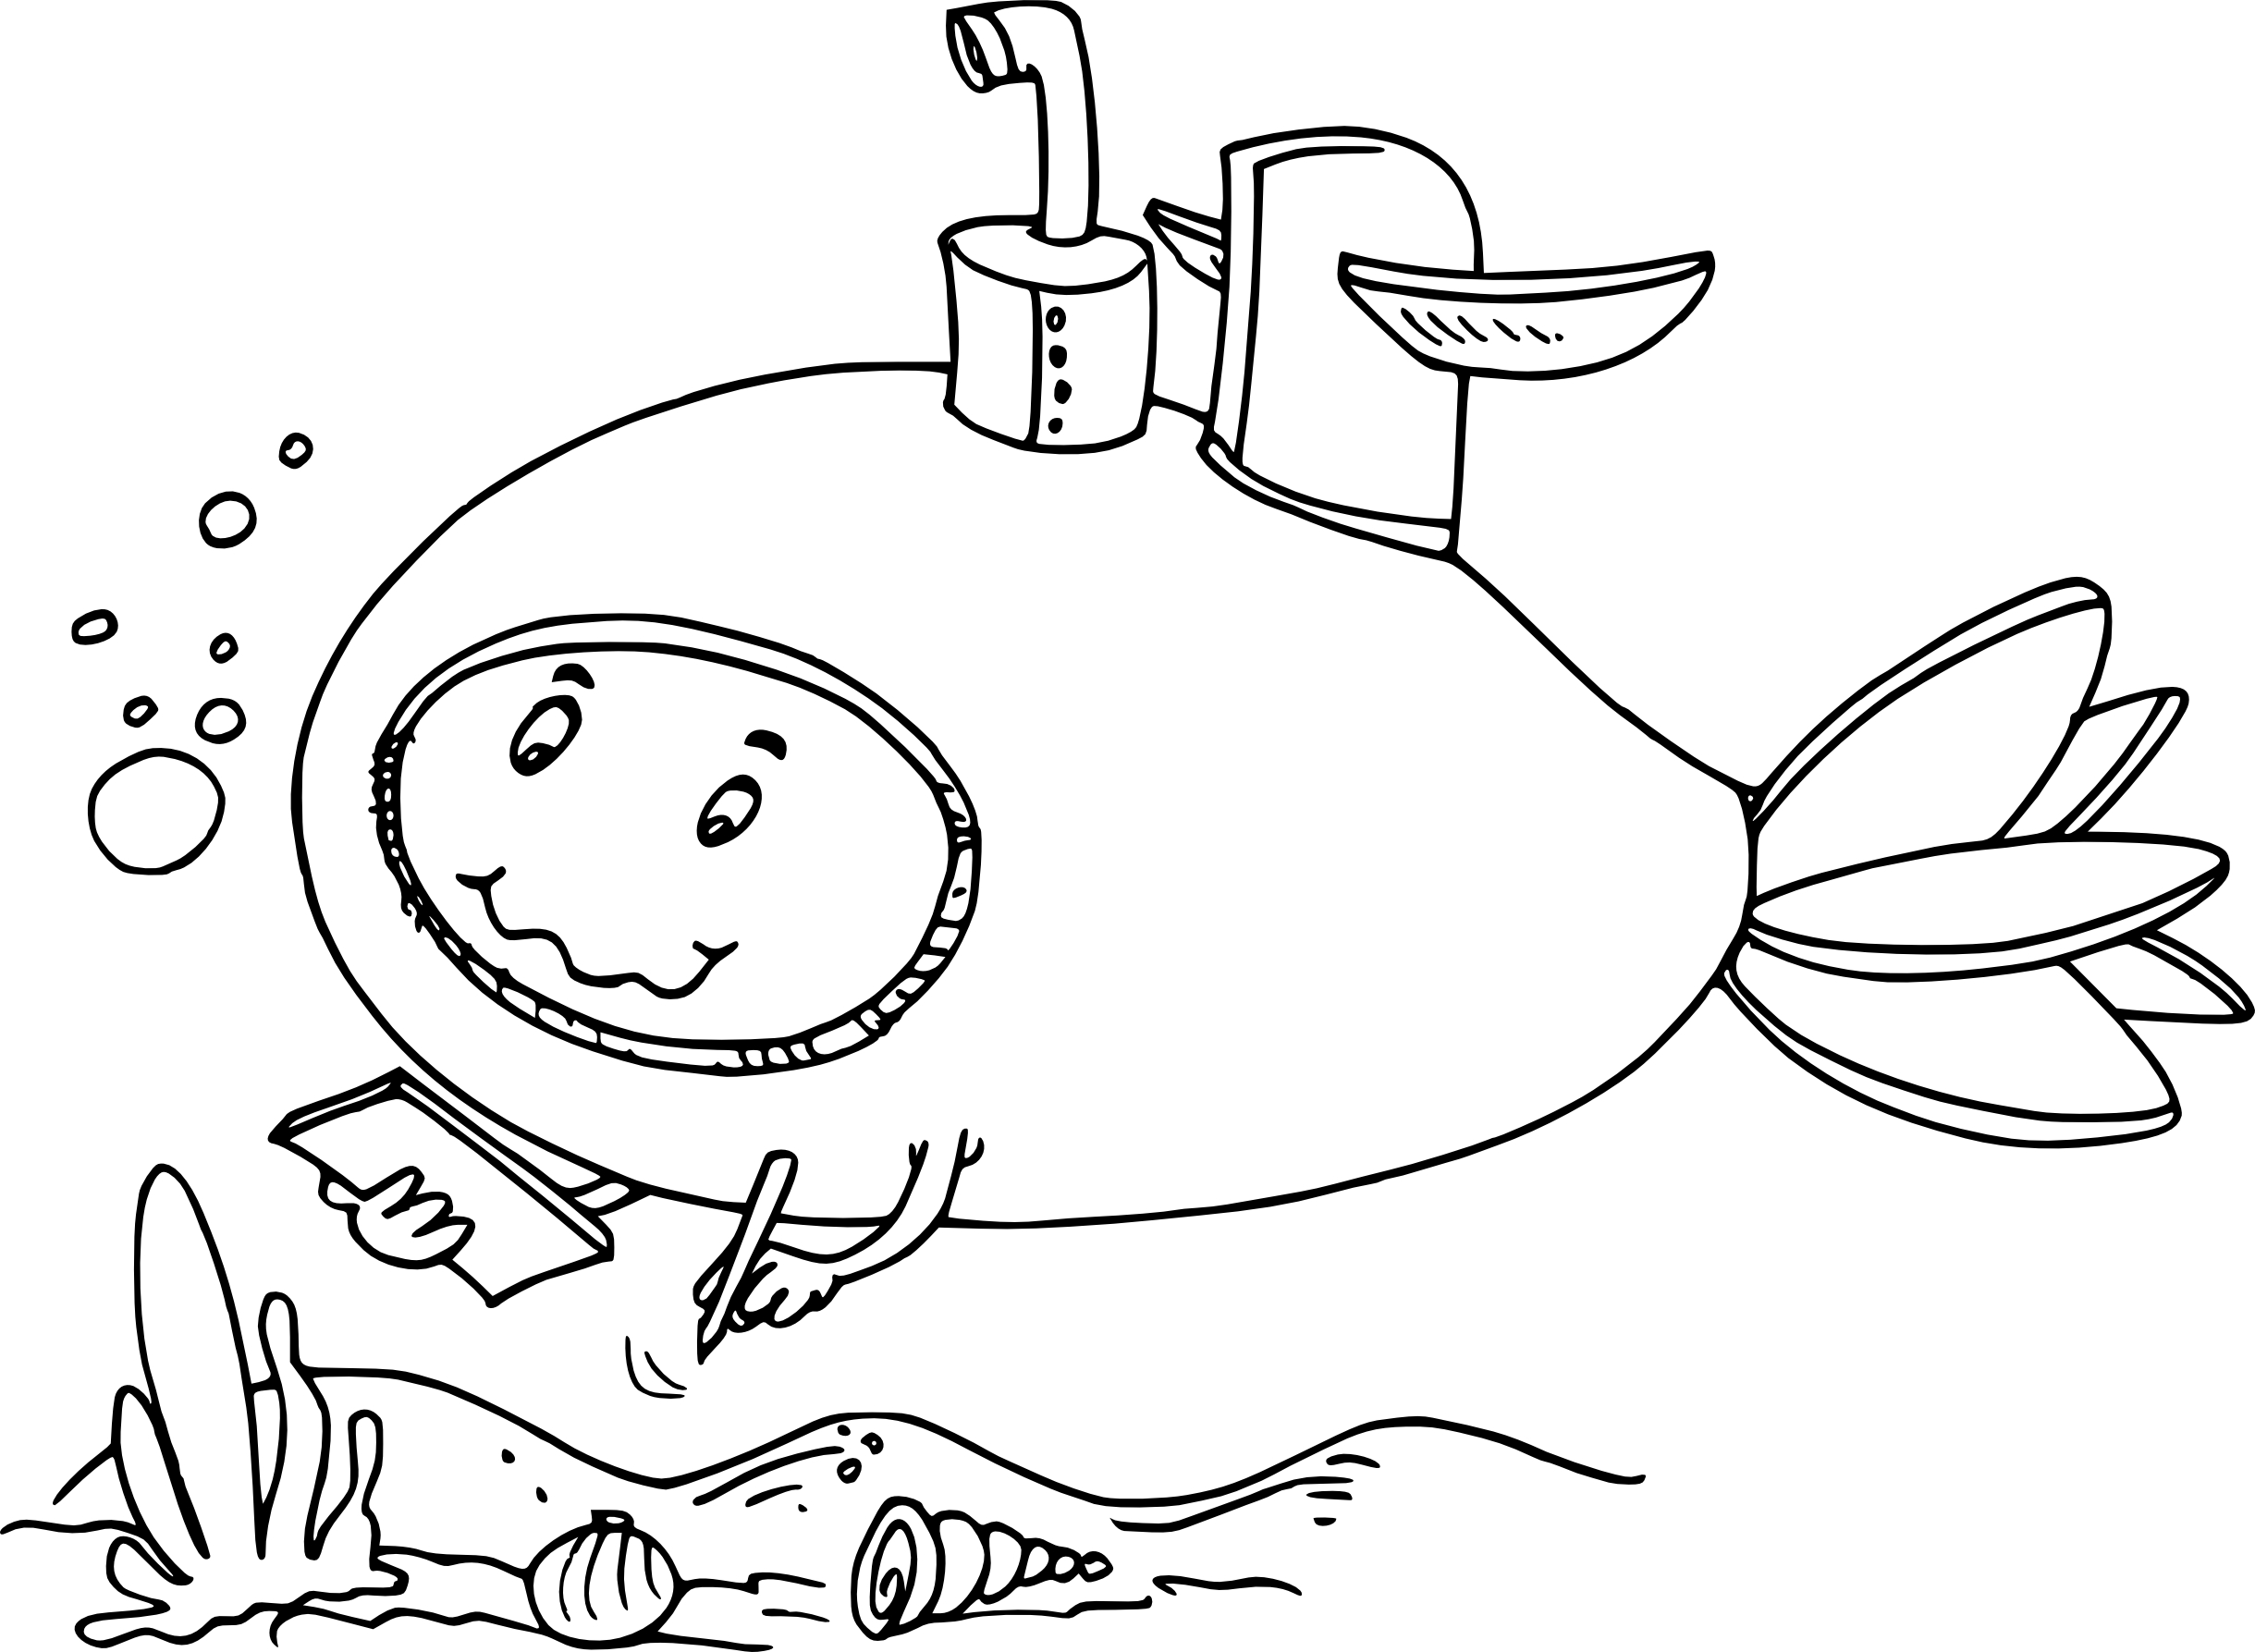 Submarine drawing and coloring page